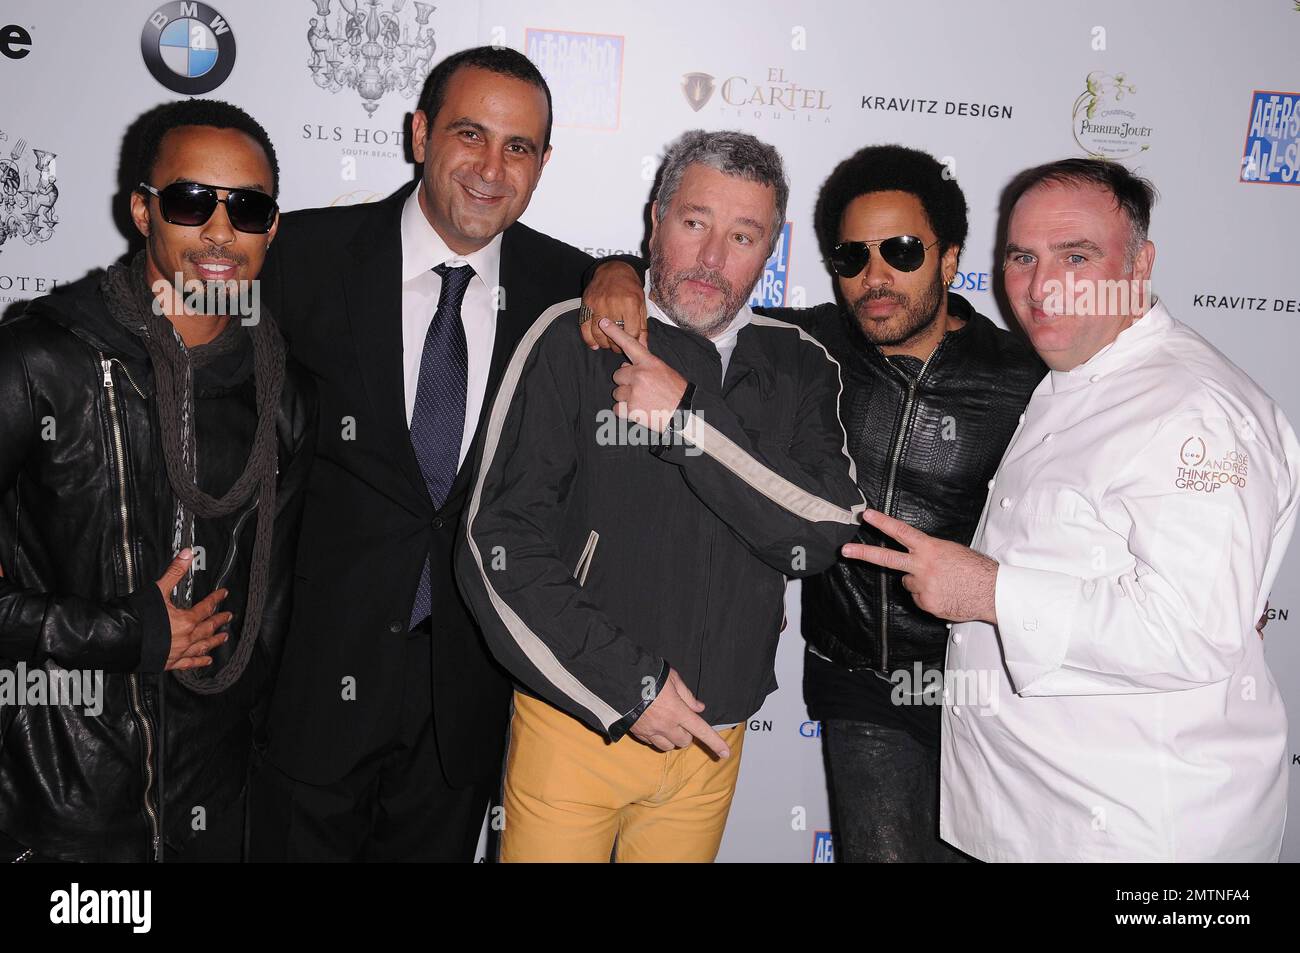 (L-R) Dallas Austin, Sam Nazarian, Philippe Starck, Lenny Kravitz and Jose Andres arrive at Grand Opening of SLS Hotel South Beach in Miami, FL. 8th November 2012. Stock Photo